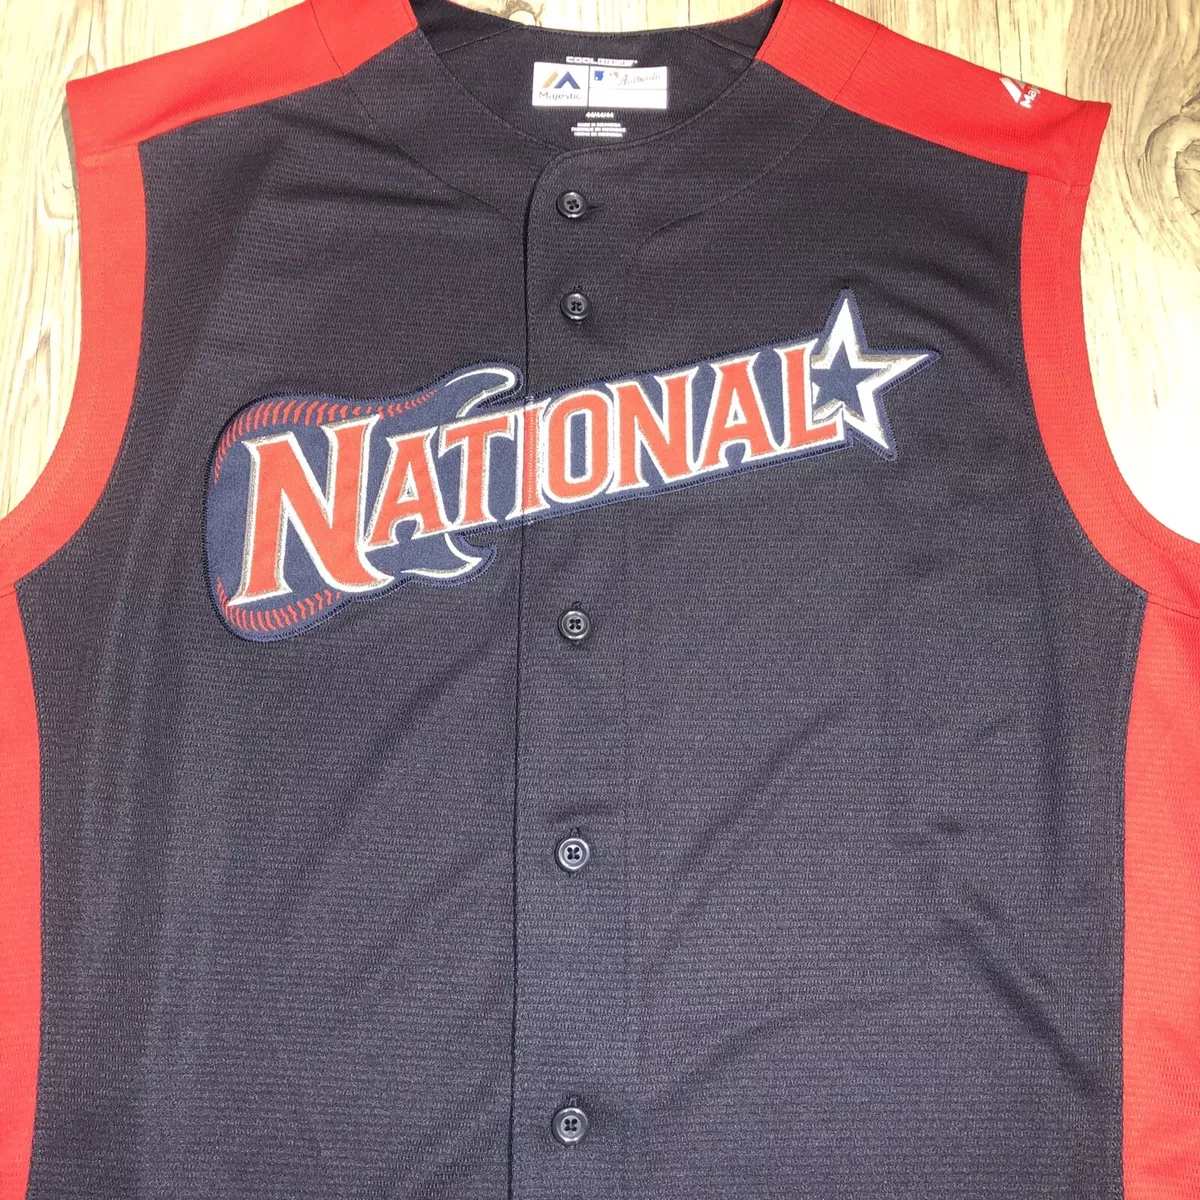 Majestic MLB 2019 All-Star Game National League Sleeveless Jersey Size 44